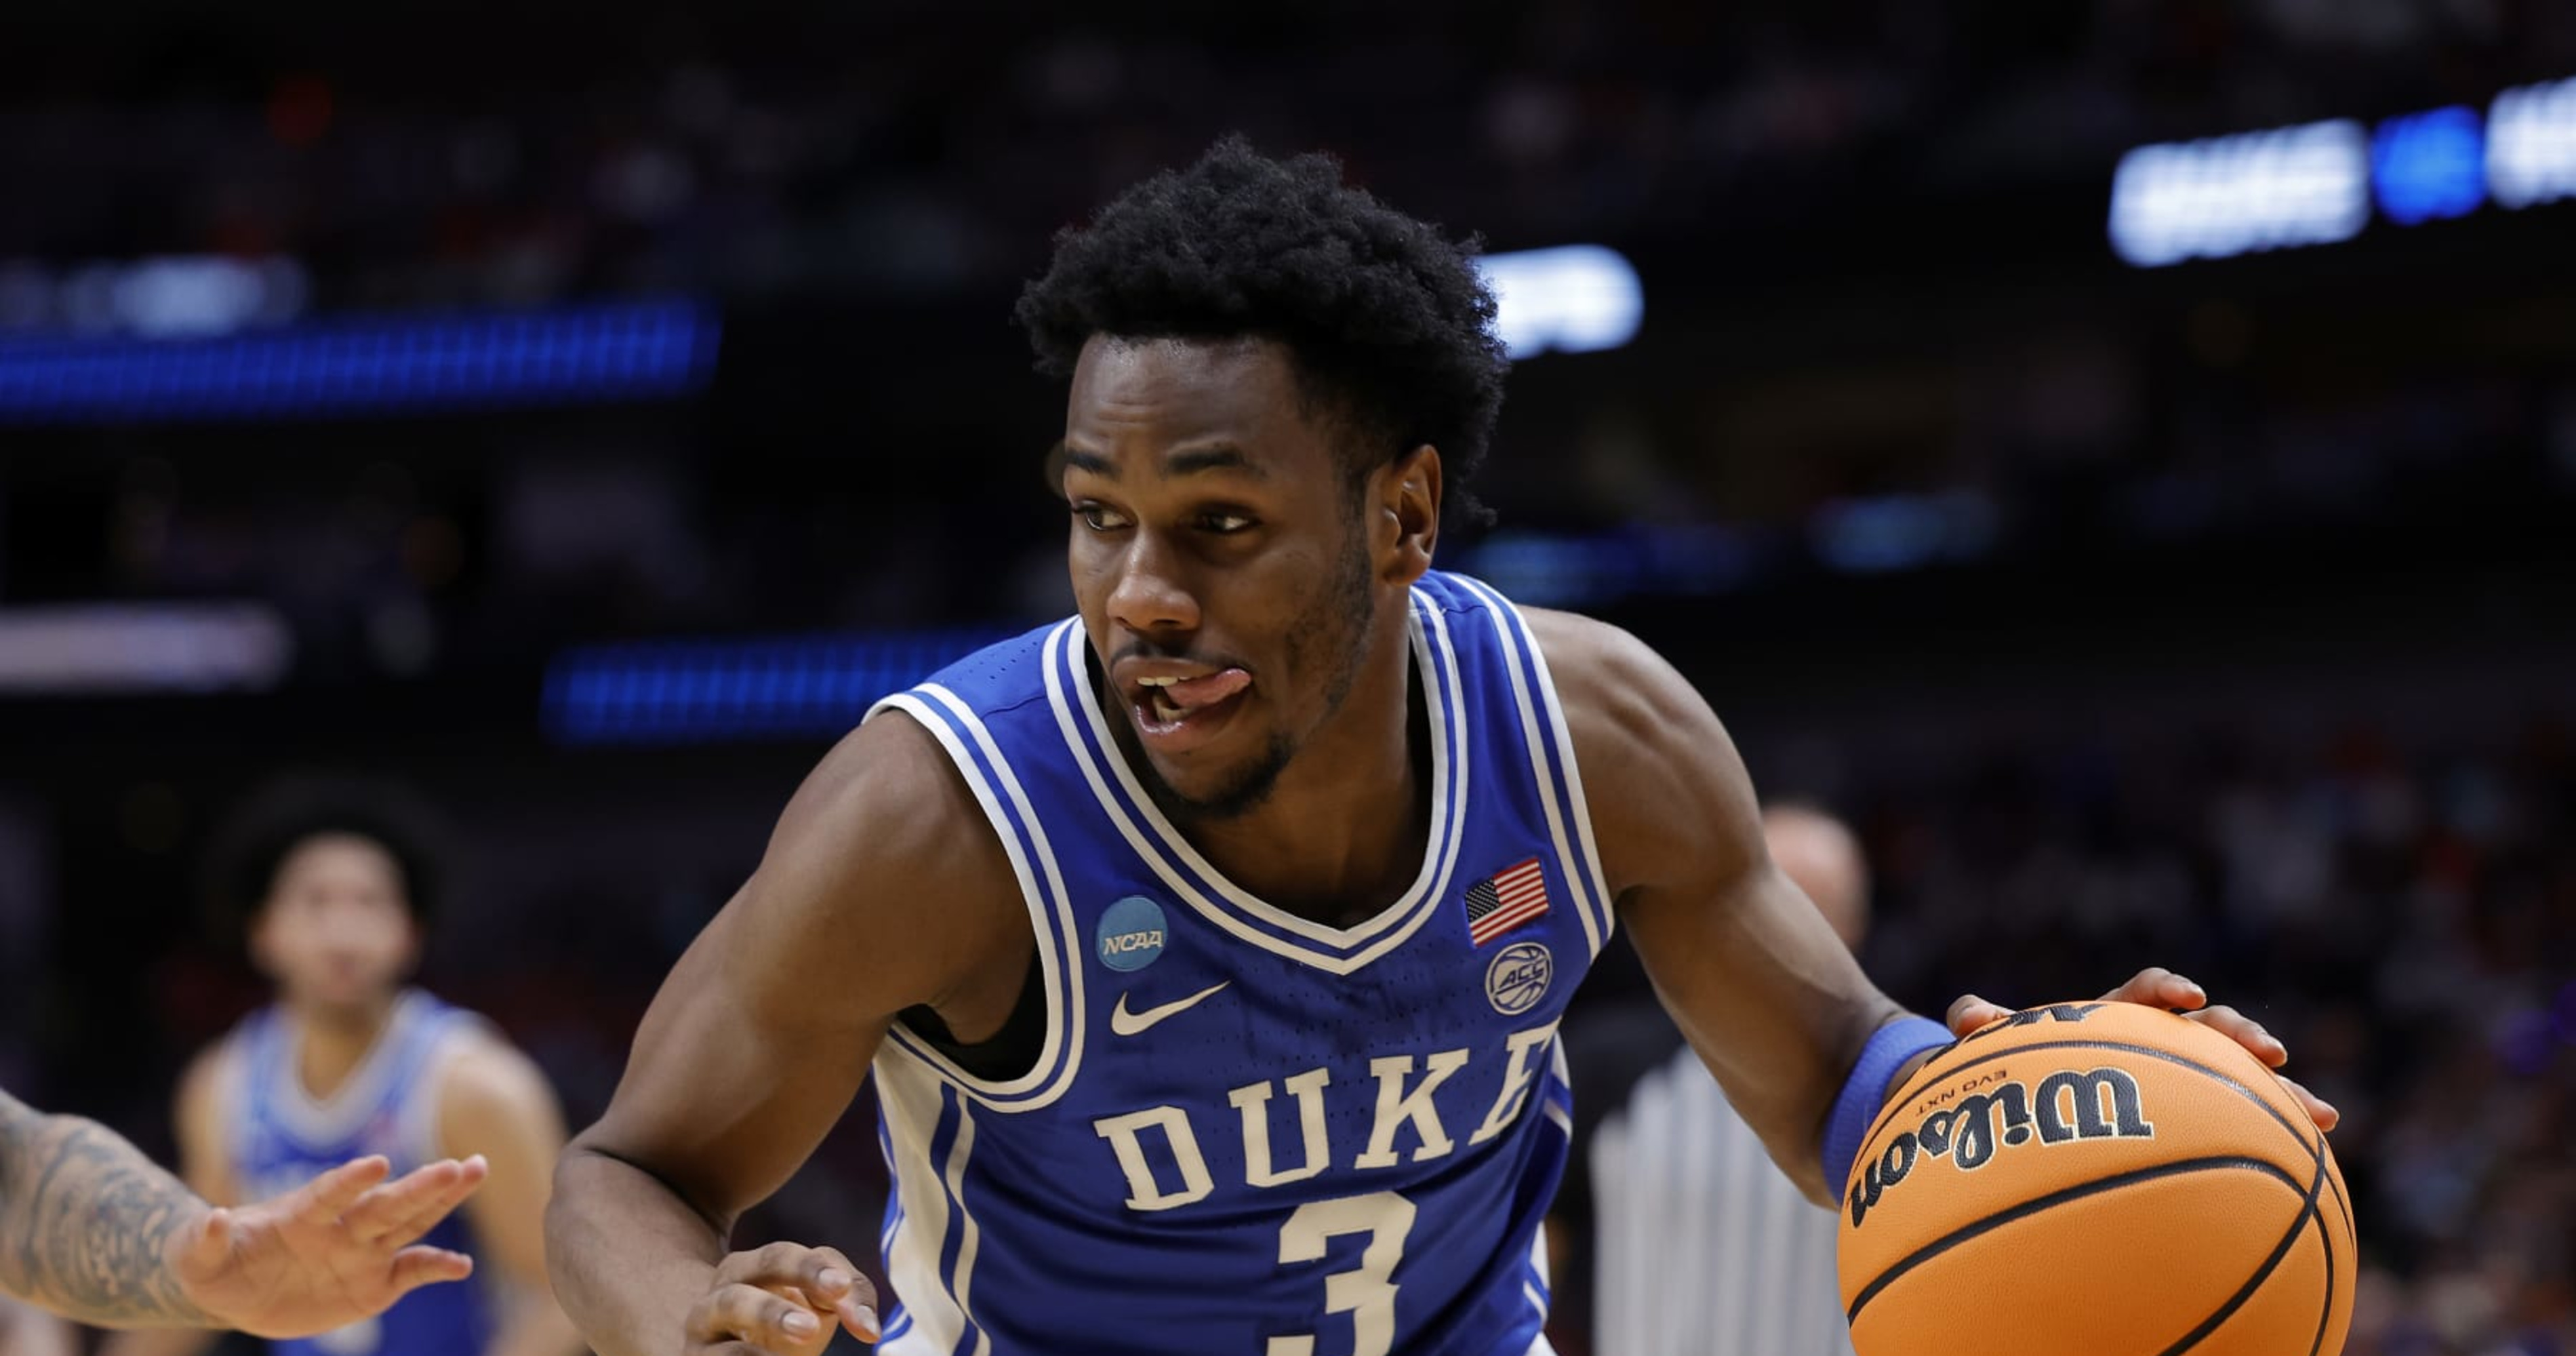 Duke Transfer Jeremy Roach Commits to Baylor After 4 Seasons with Blue Devils